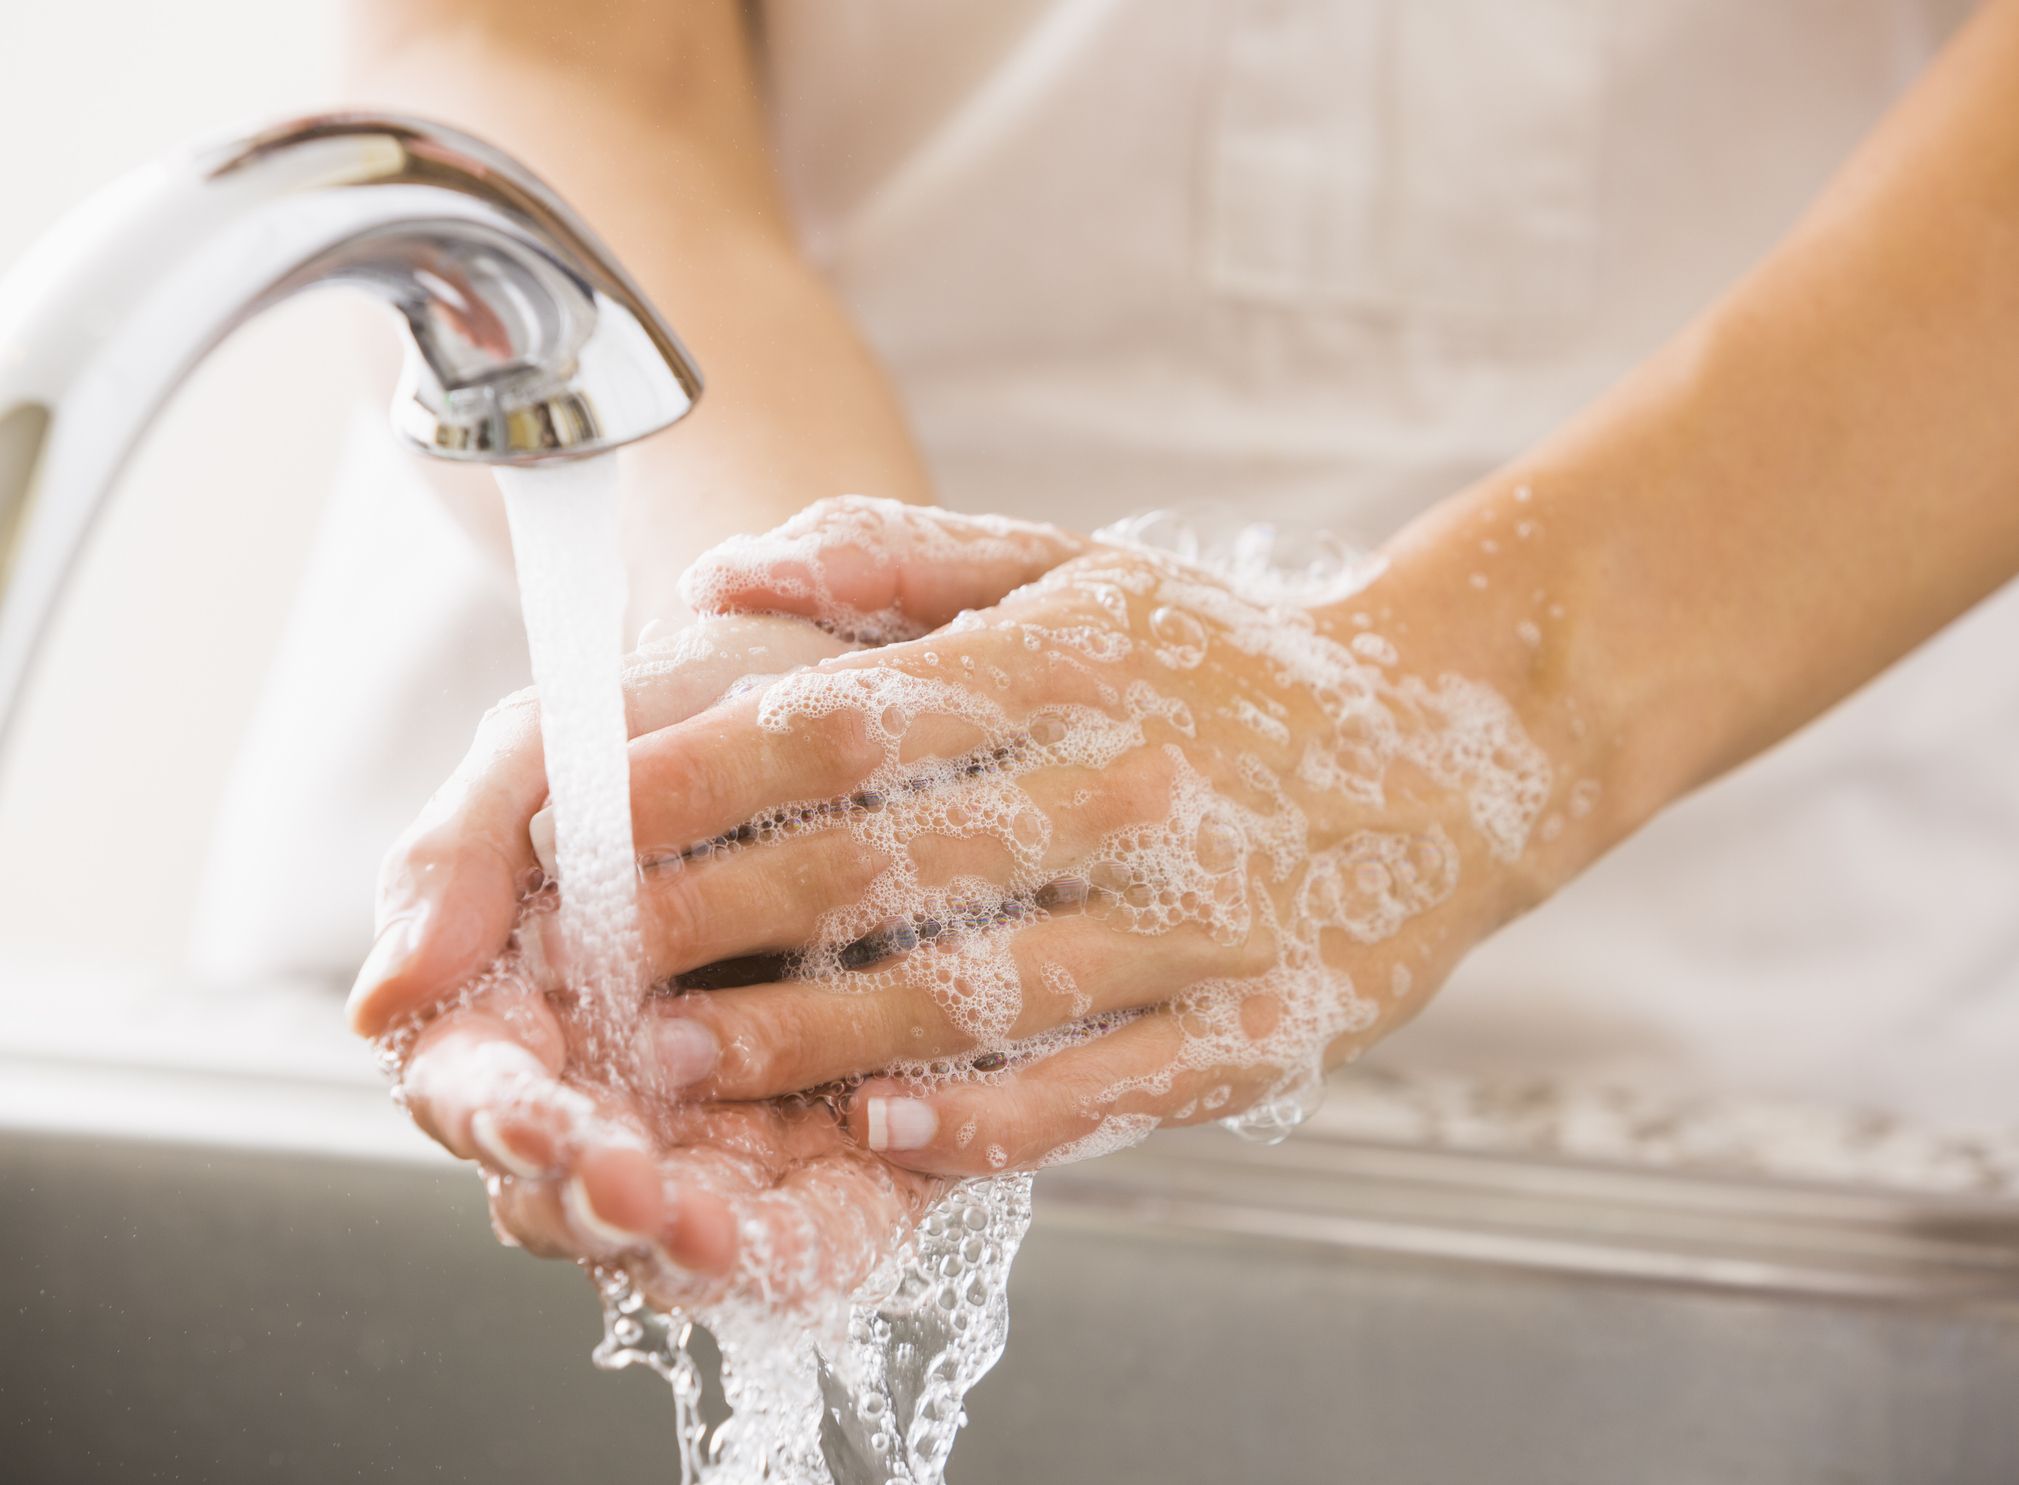 coronavirus how to look after your hands after washing and sanitising